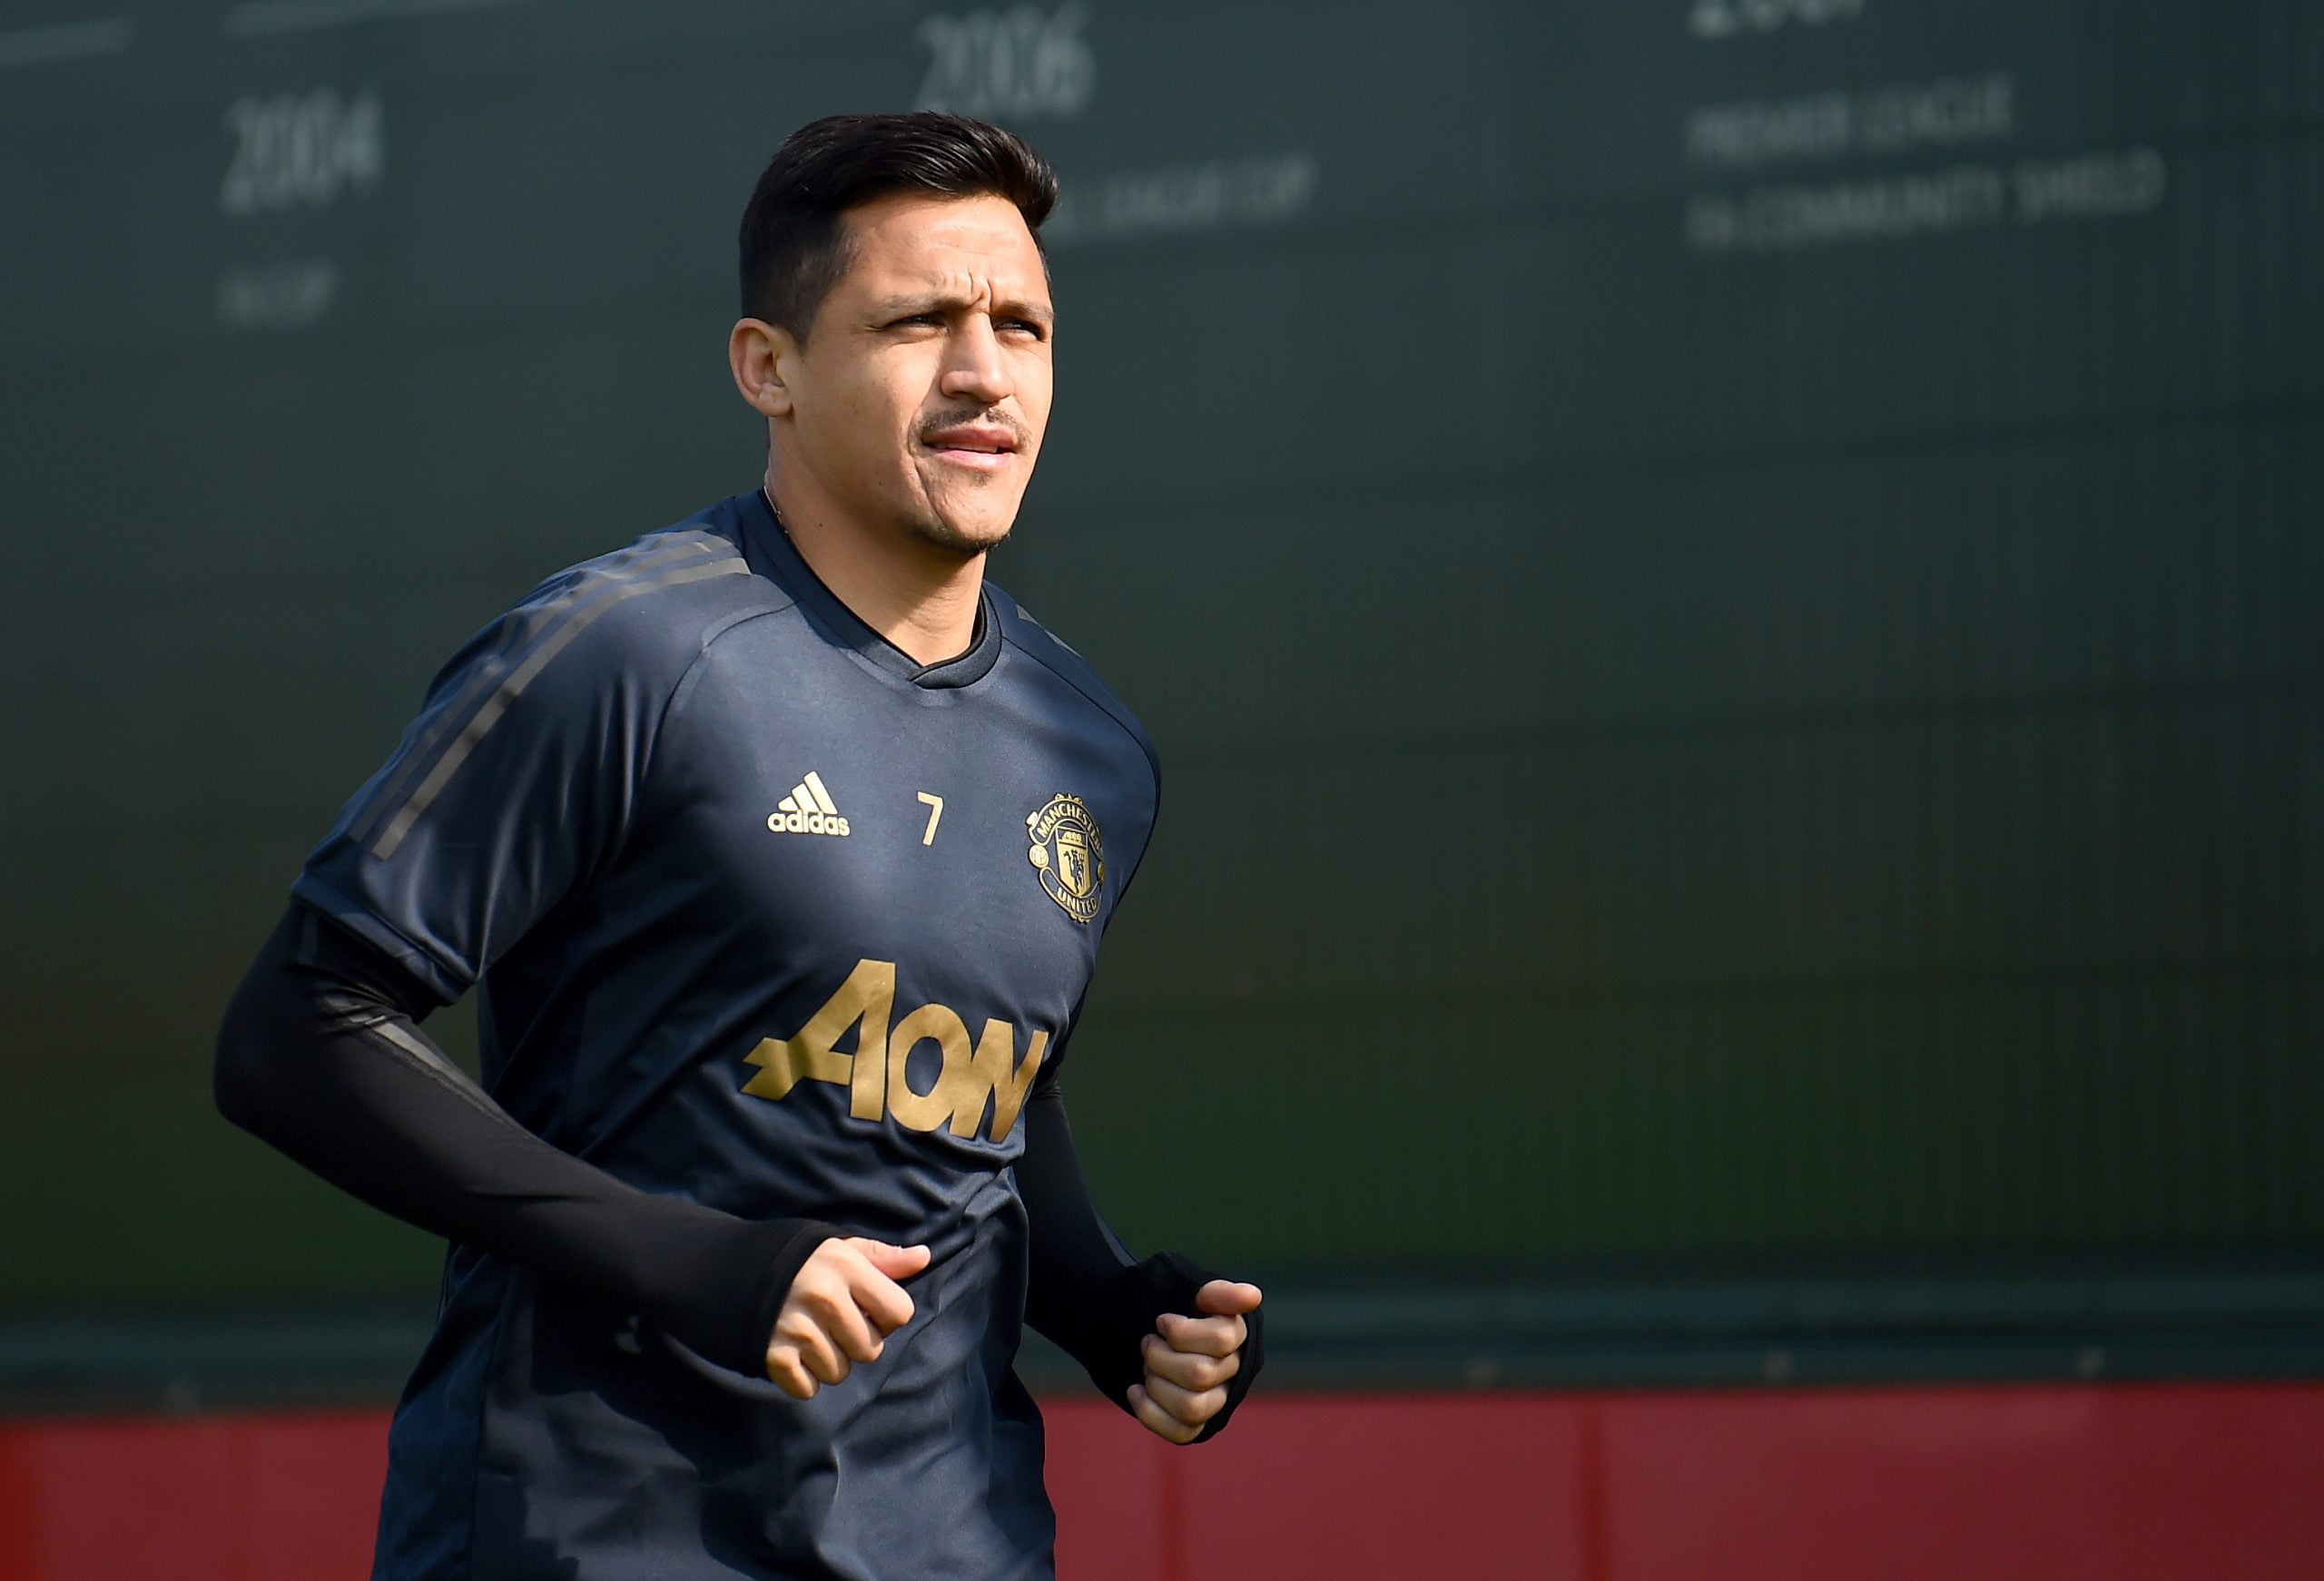 Alexis Sanchez of Manchester United walks off after the Manchester United training session ahead of the UEFA Champions League Quarter Final First Leg match between Manchester United v FC Barcelona at Aon Training Complex on April 09, 2019 in Manchester, England. (Photo by Nathan Stirk/Getty Images)